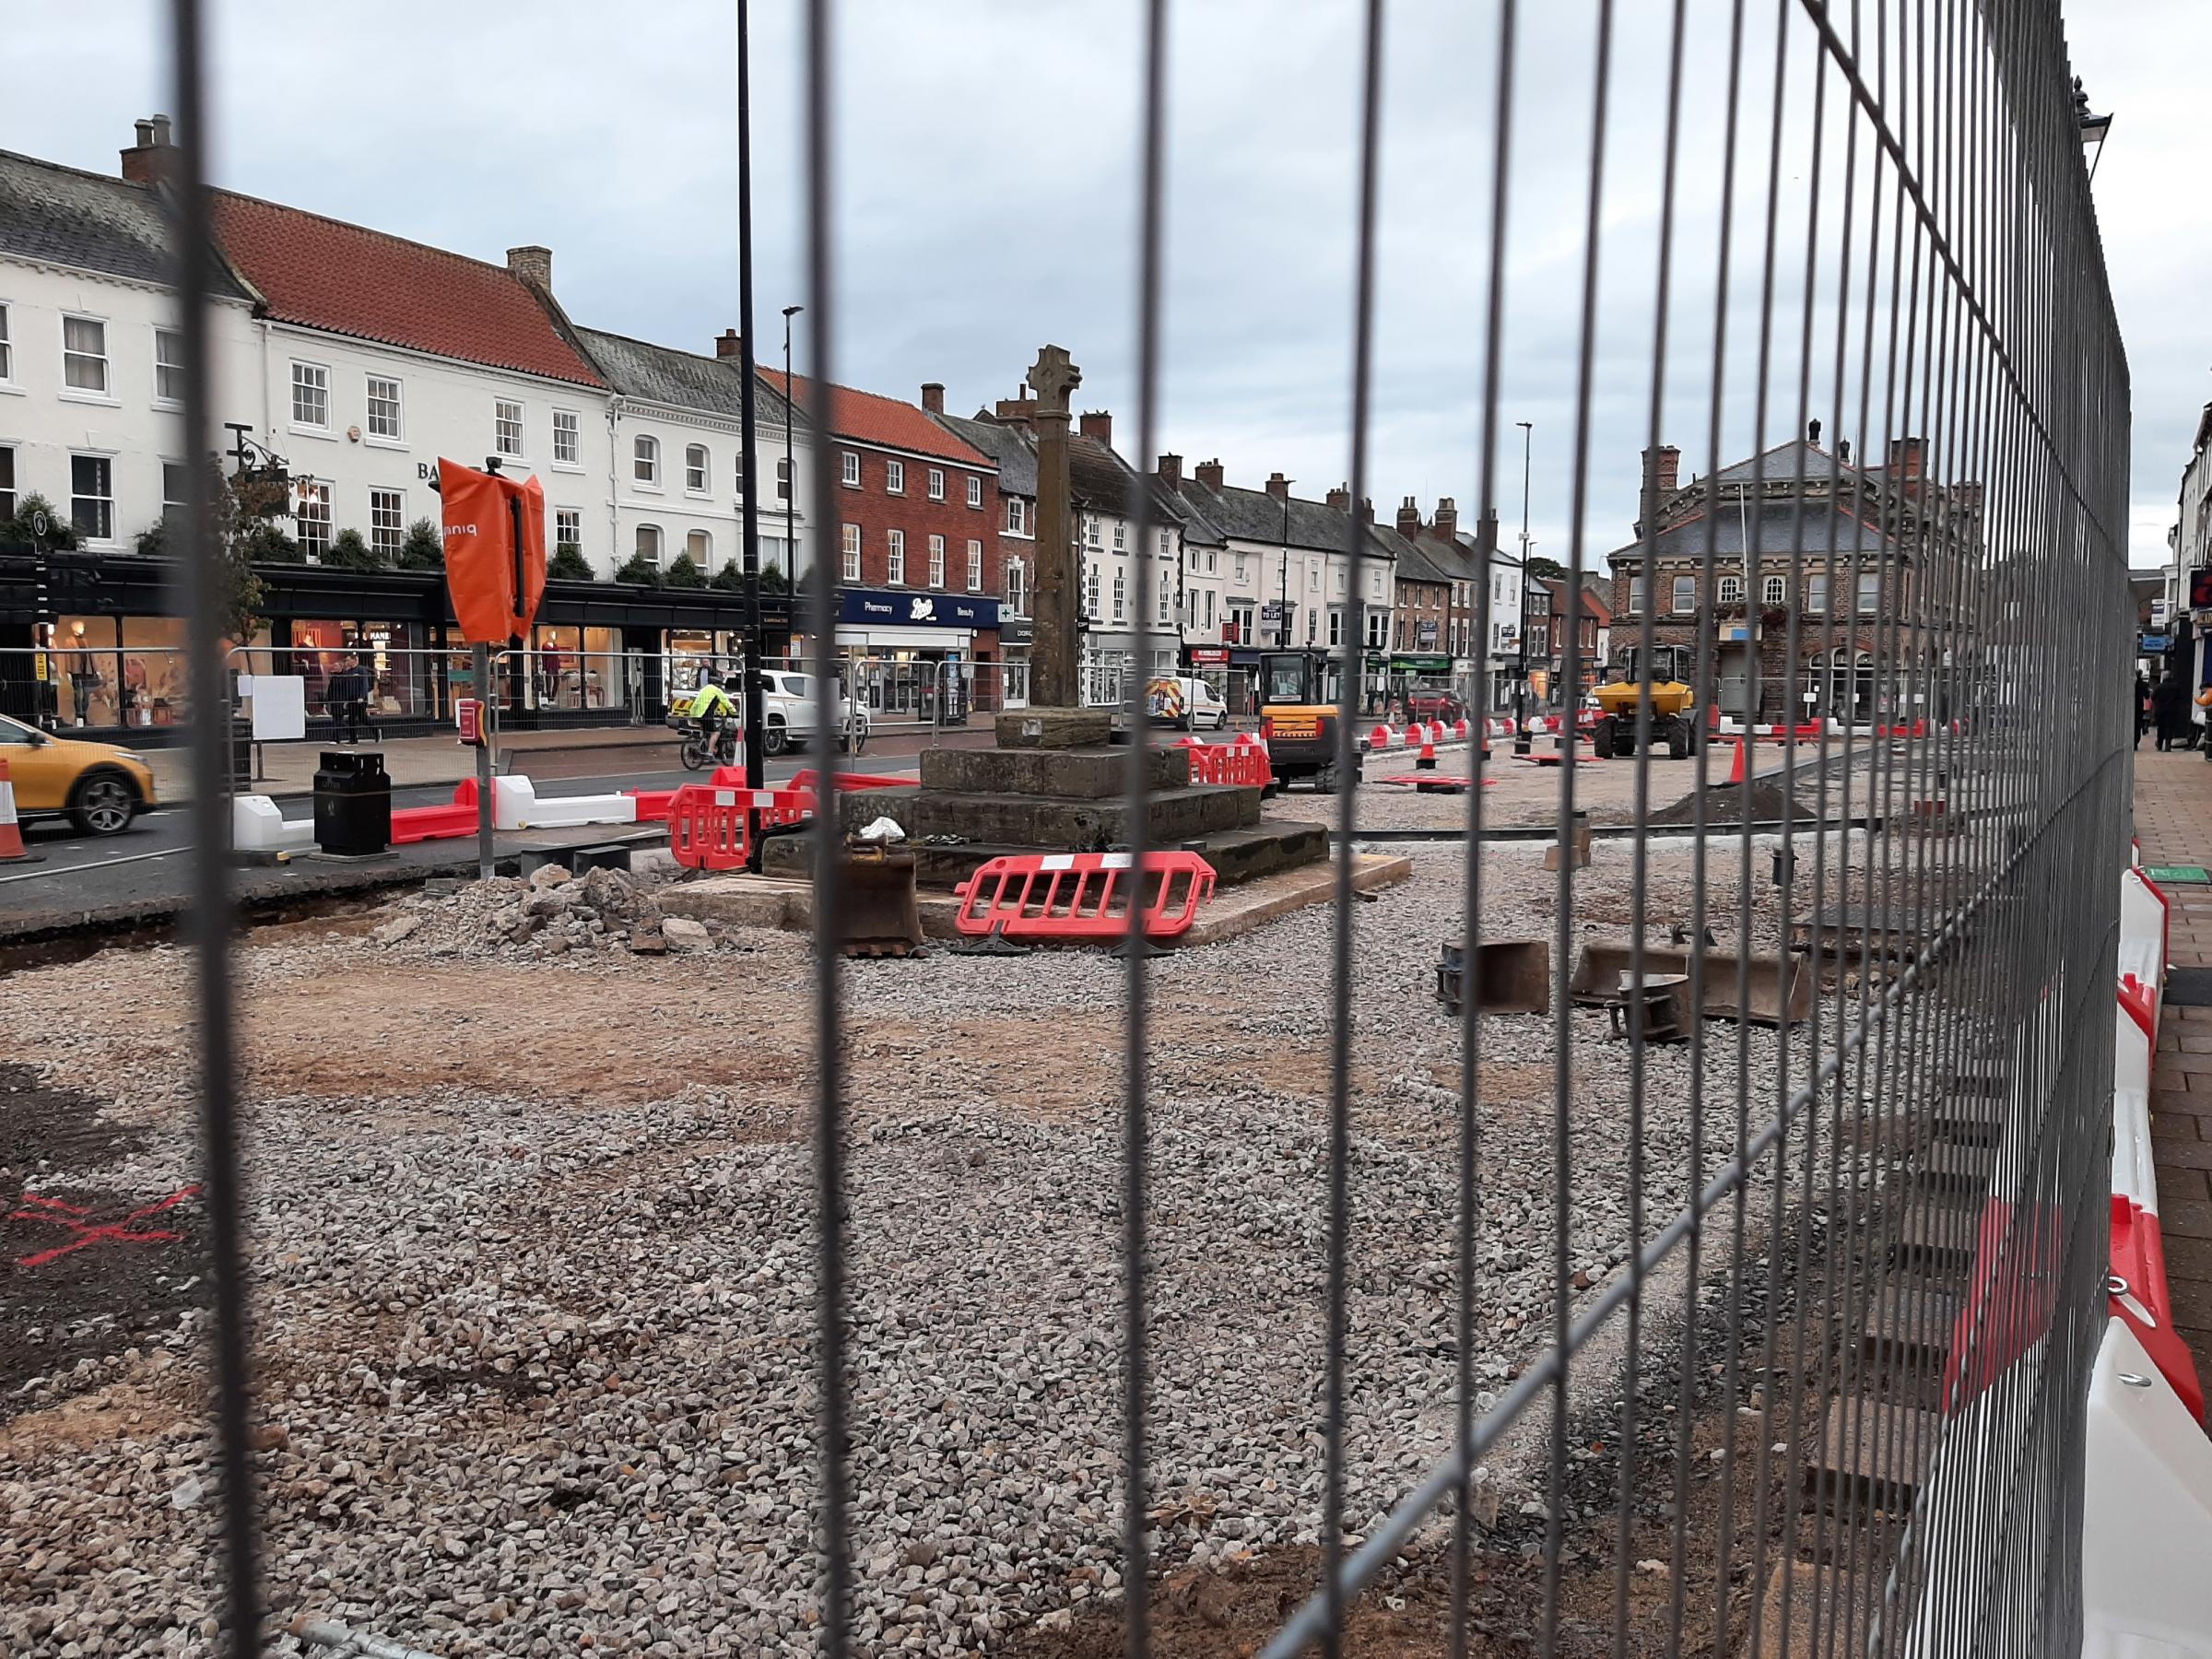 A large section of Northallerton High Street remains fenced off while redevelopment work is carried out